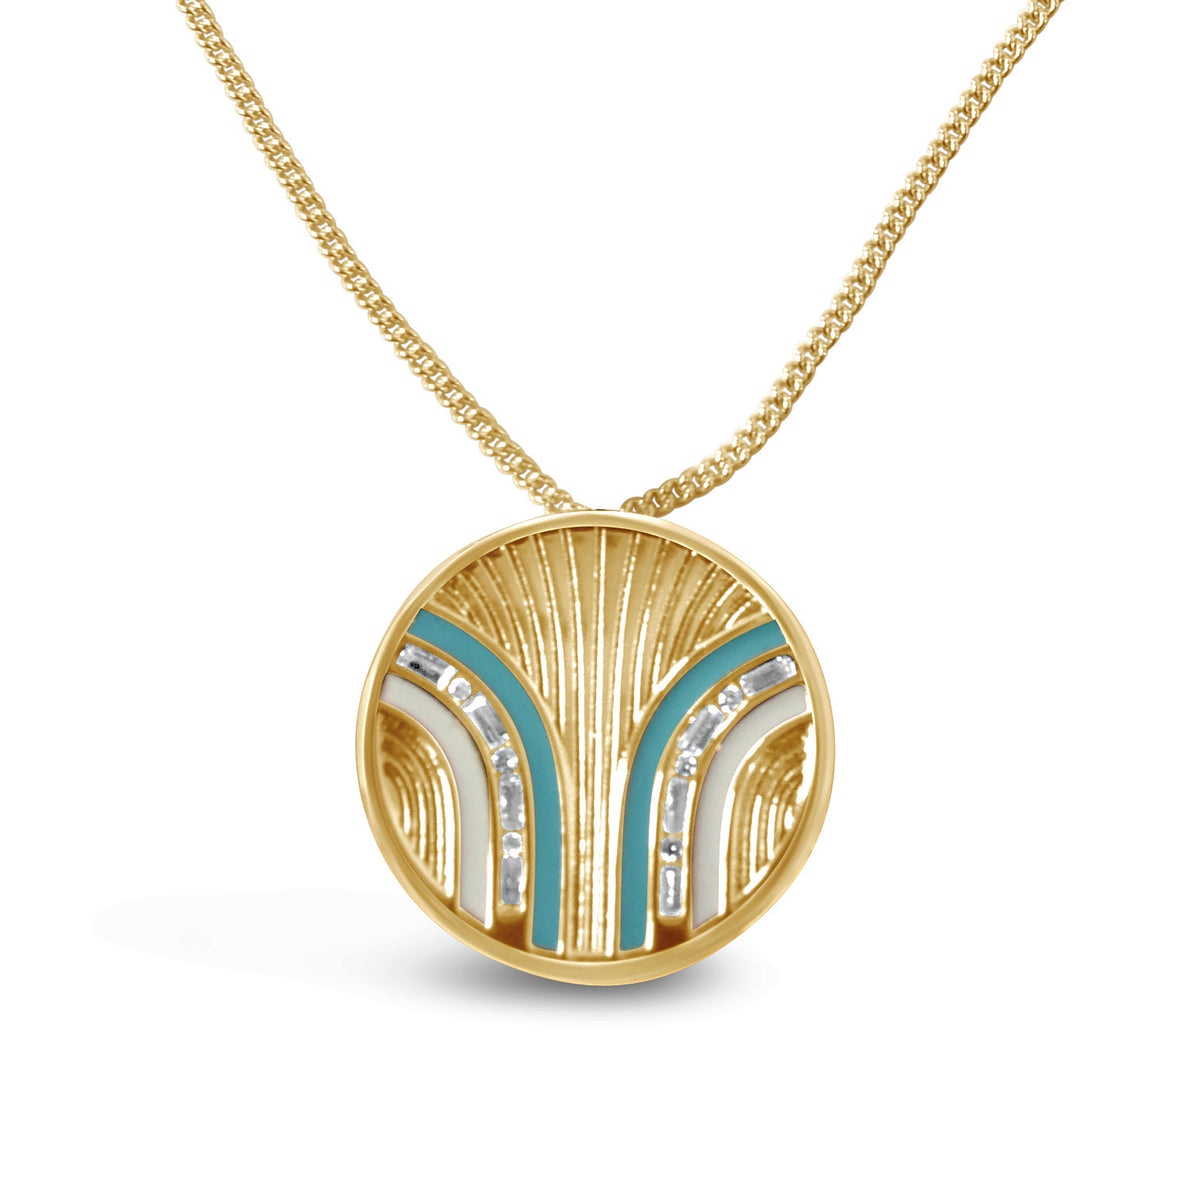 South Beach Coin Necklace - Turquoise/White